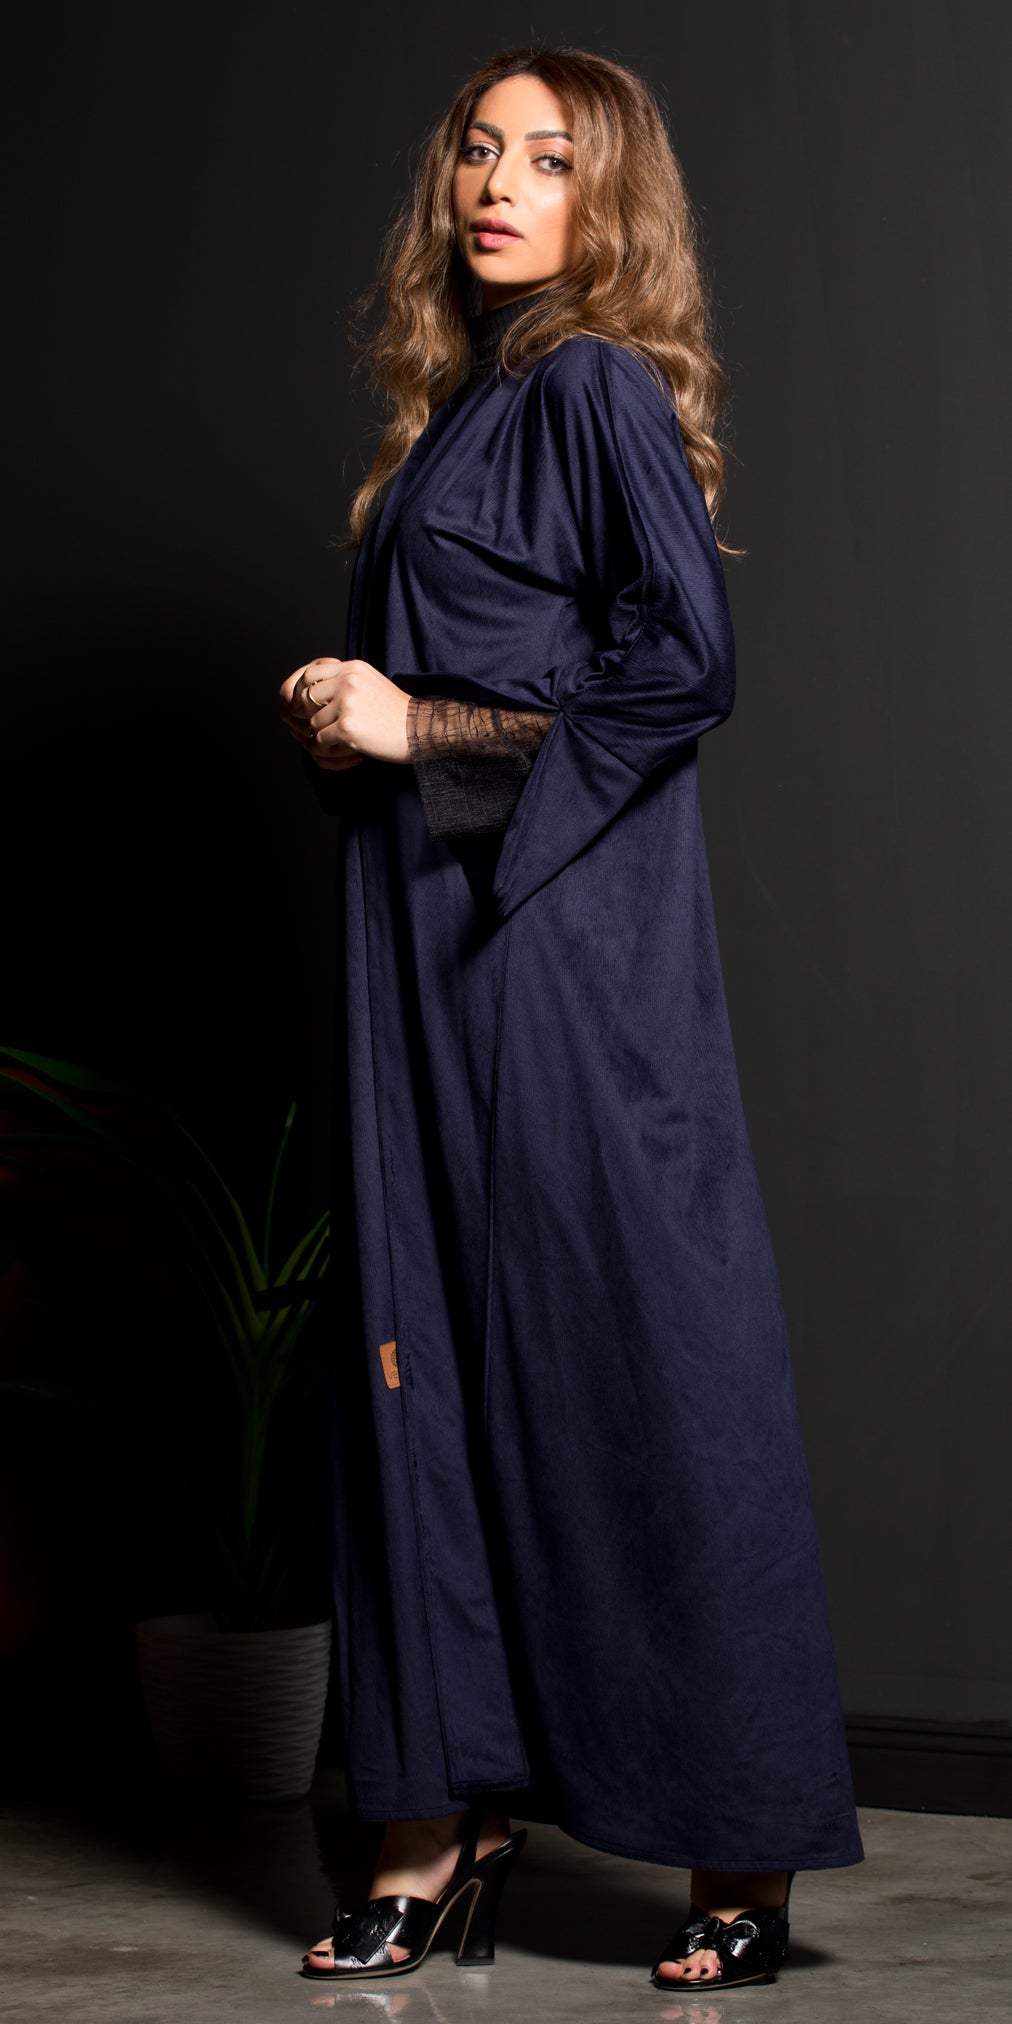 CL-0157 Winter abaya, classic model, navy blue velvet, with lace added in the sleeve